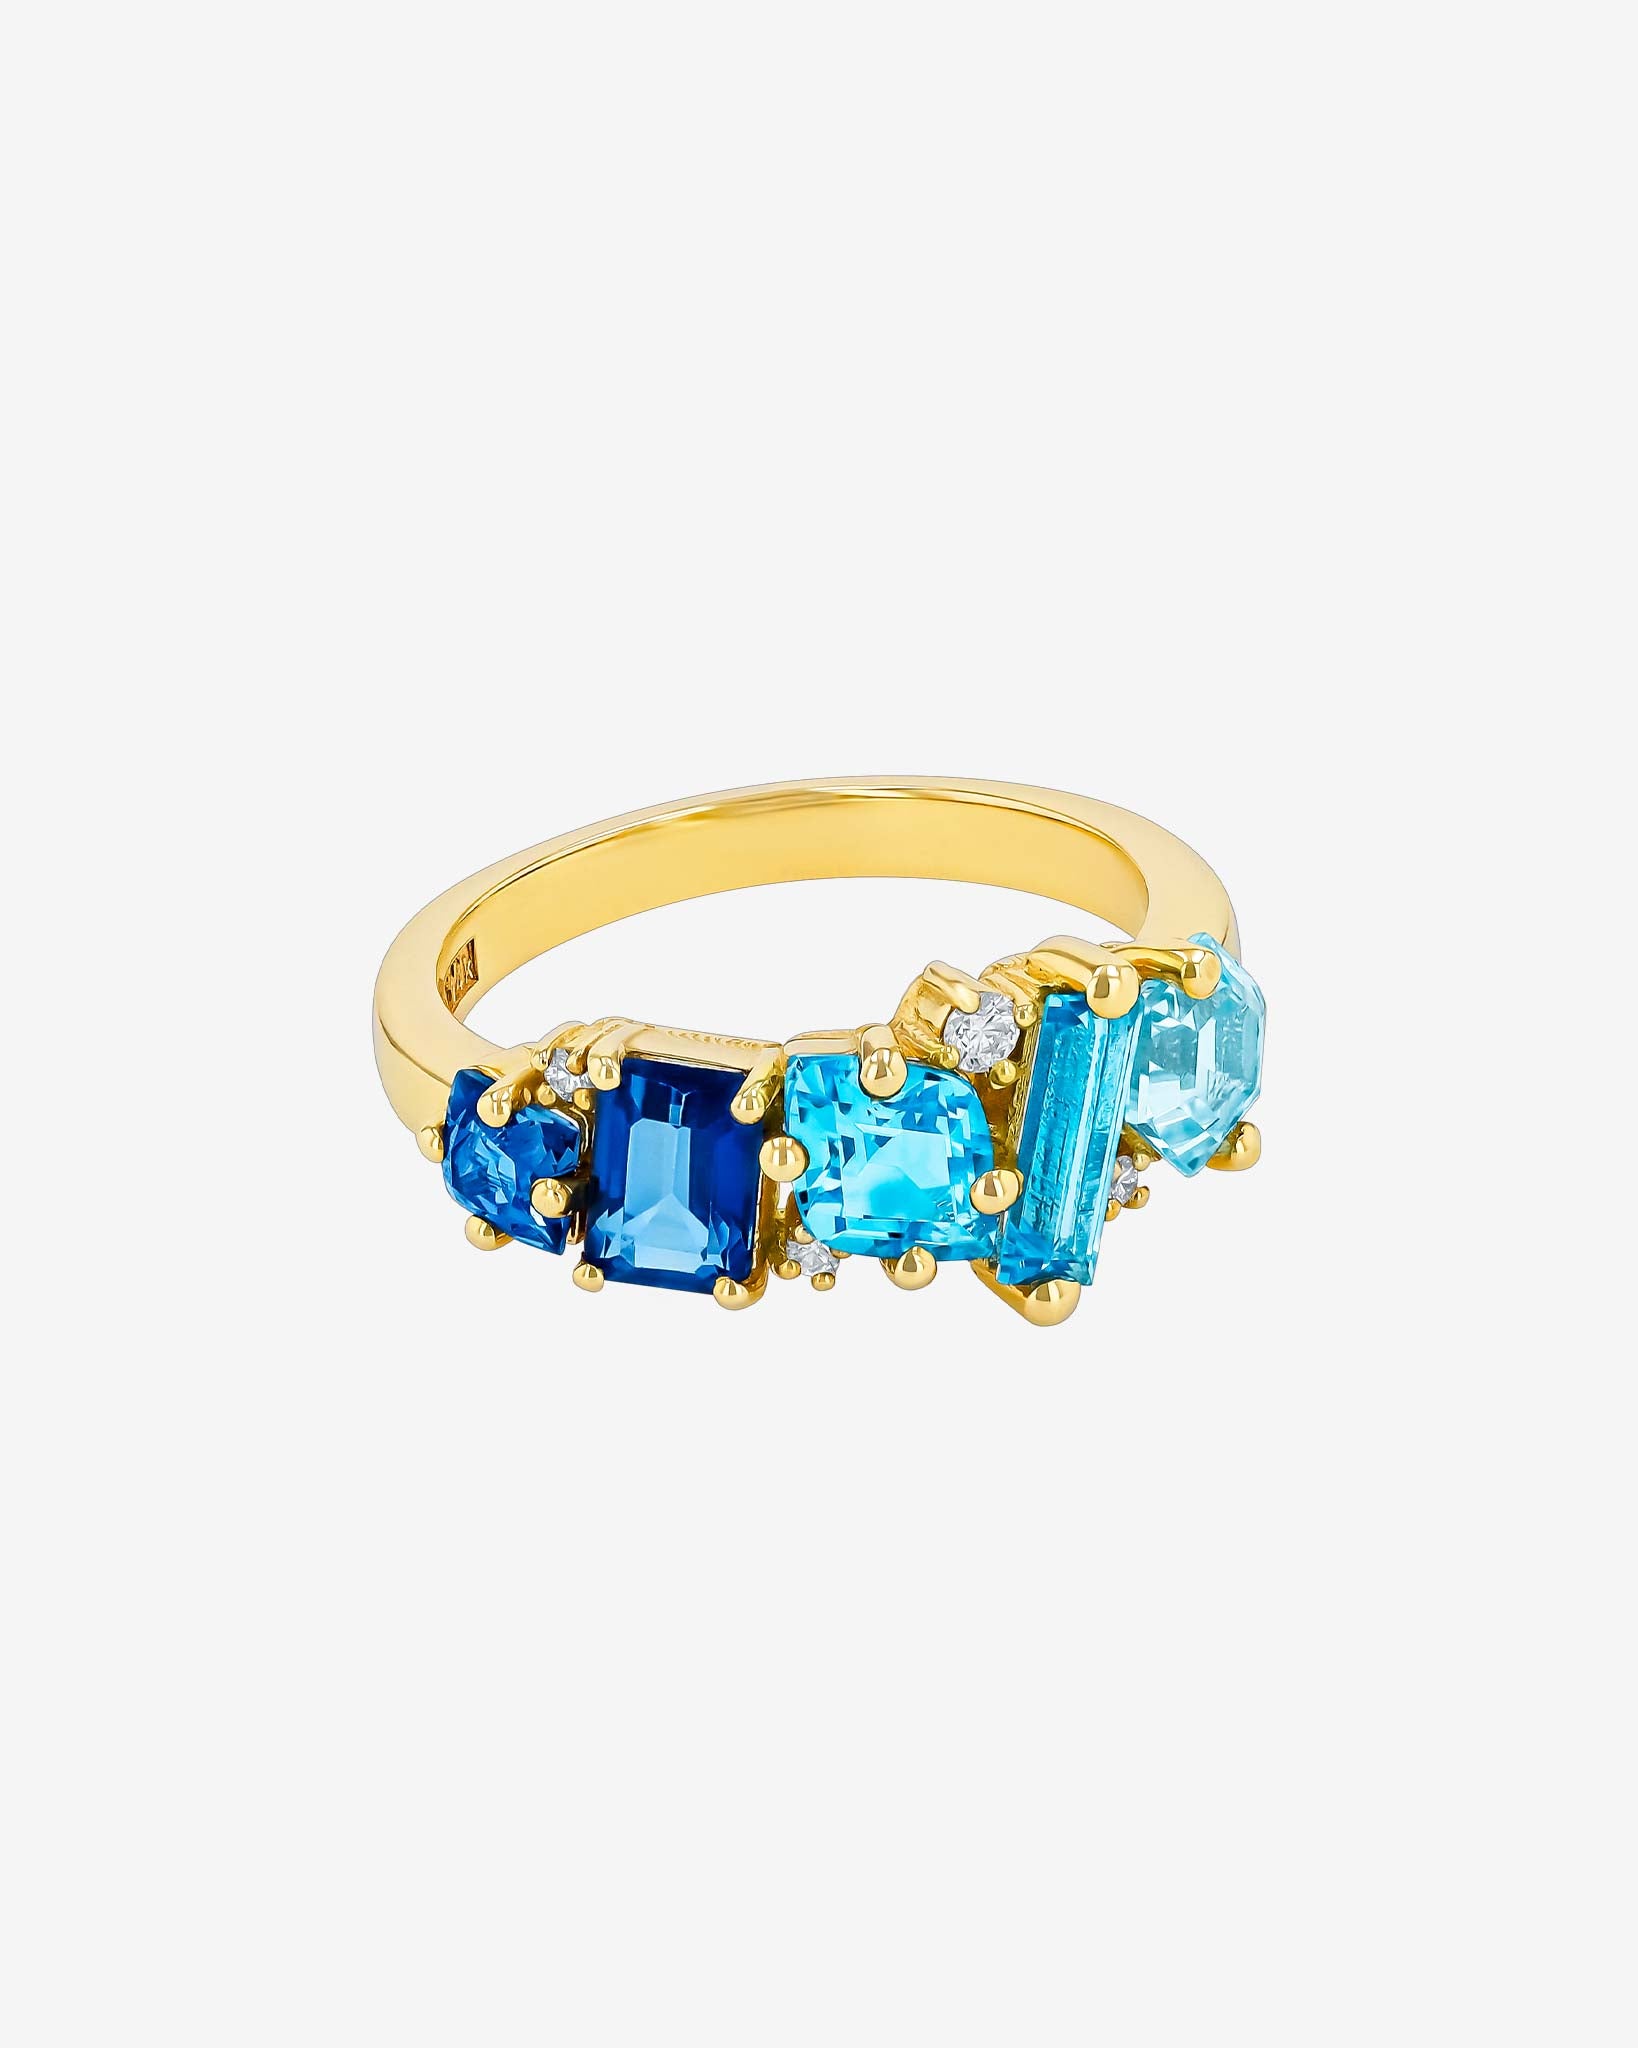 Kalan By Suzanne Kalan Nadima Blend Blue Ombre Ring in 14k yellow gold